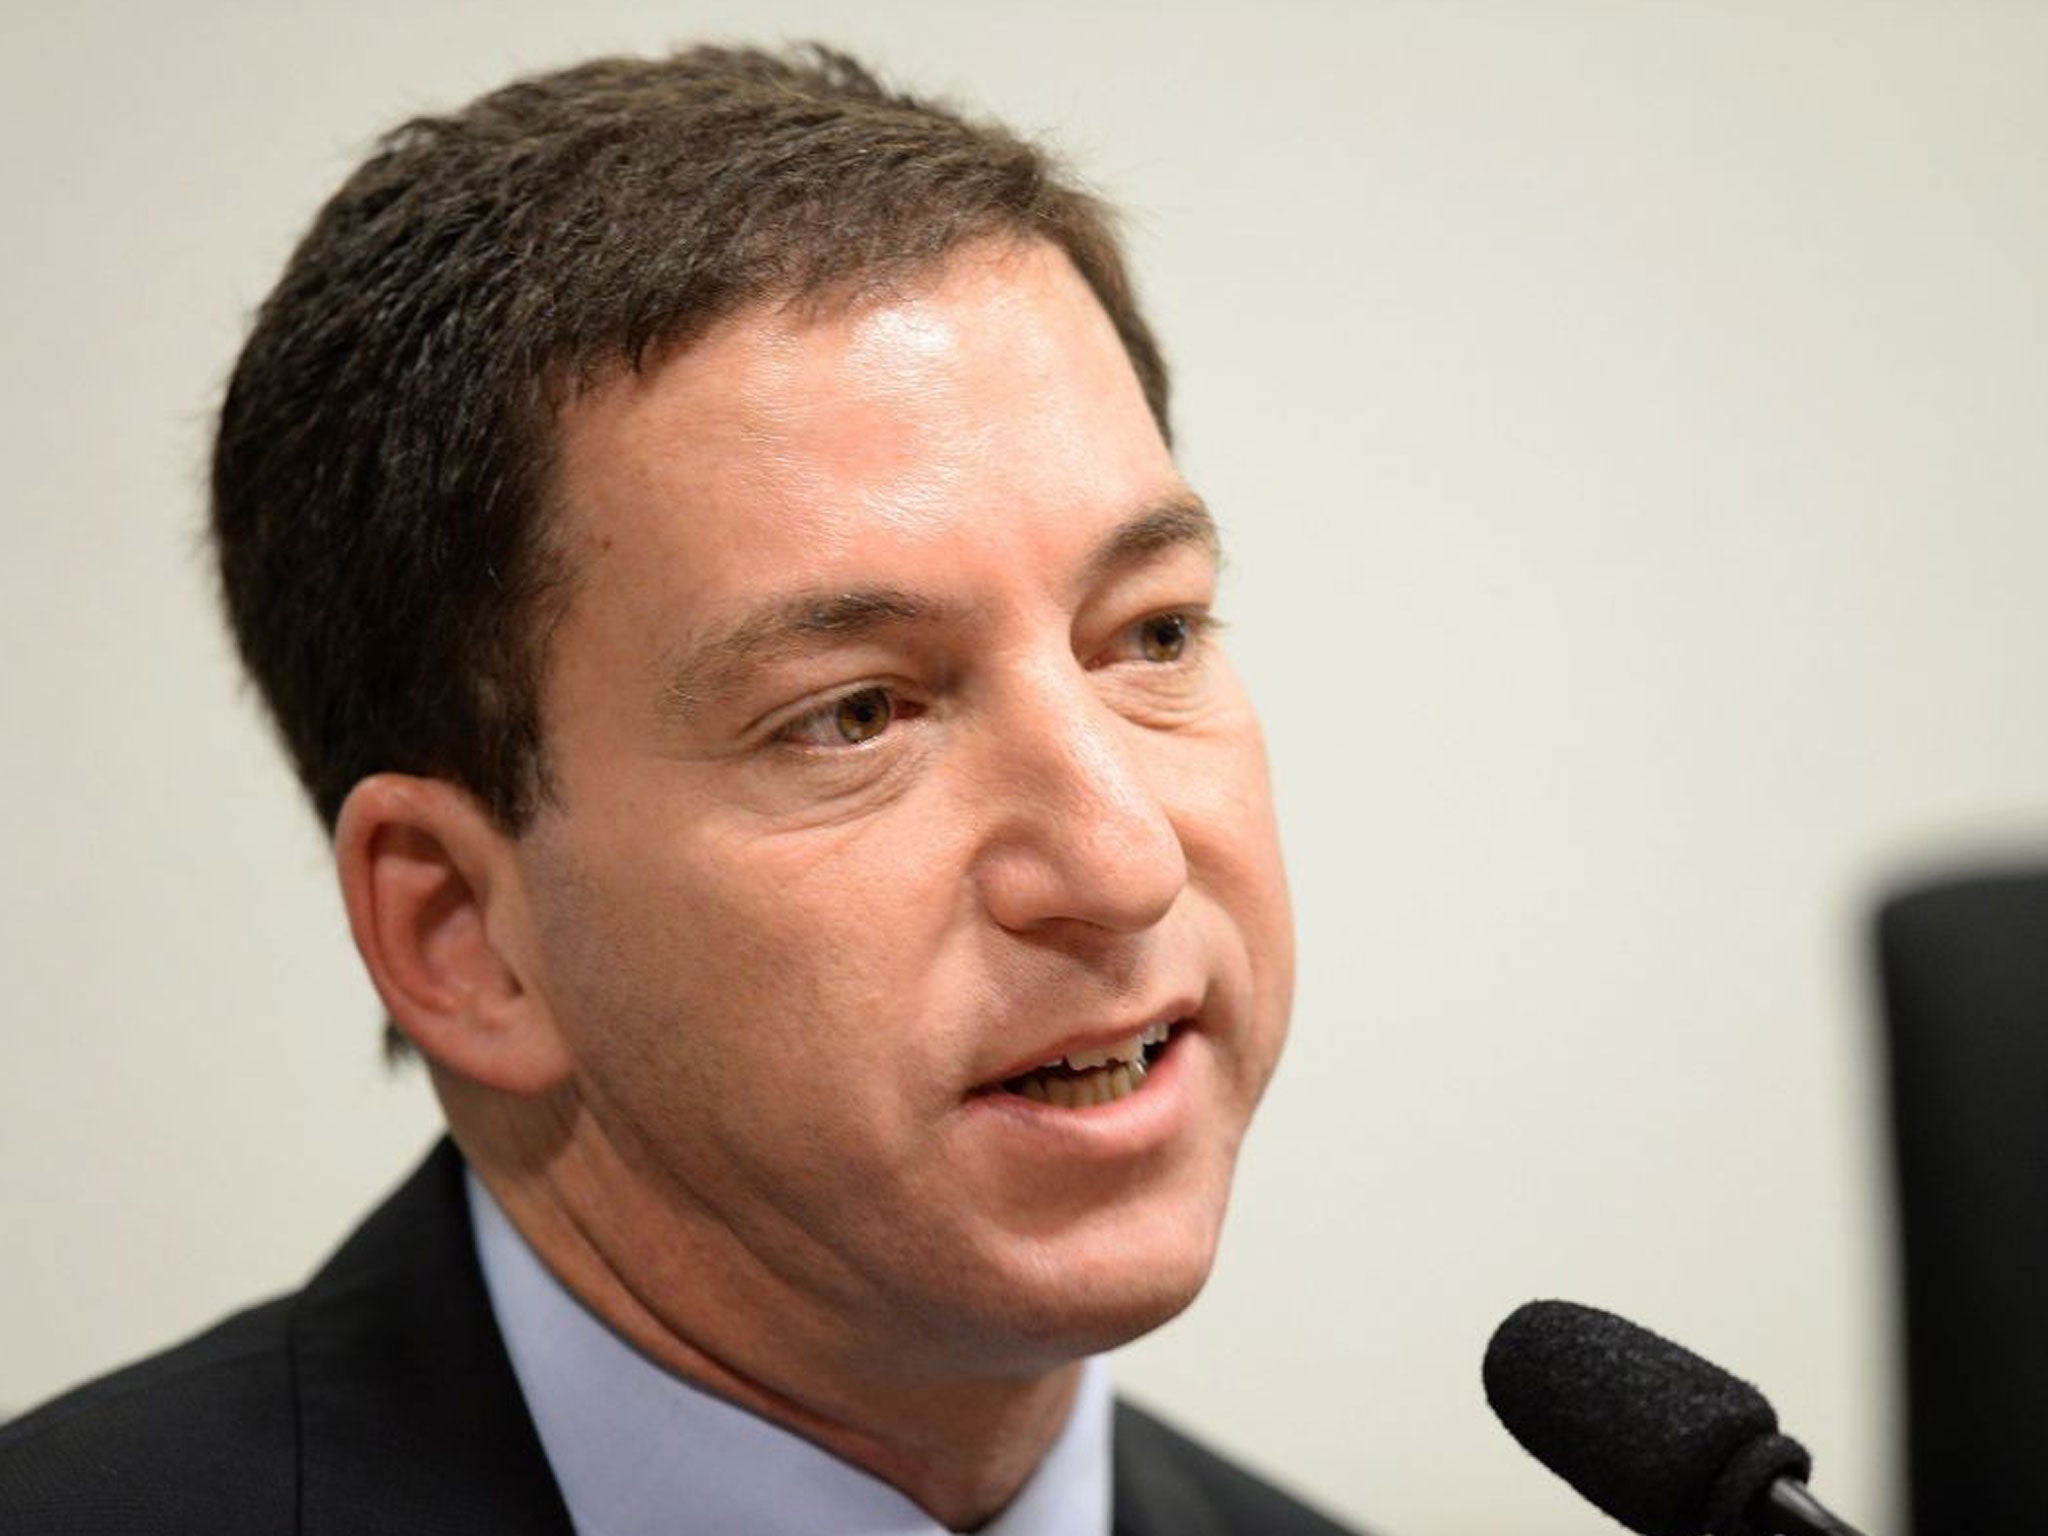 Glenn Greenwald, the journalist who broke allegations about the National Security Agency by whistleblower Edward Snowden has announced he is quitting the Guardian newspaper to pursue a "dream journalistic opportunity".